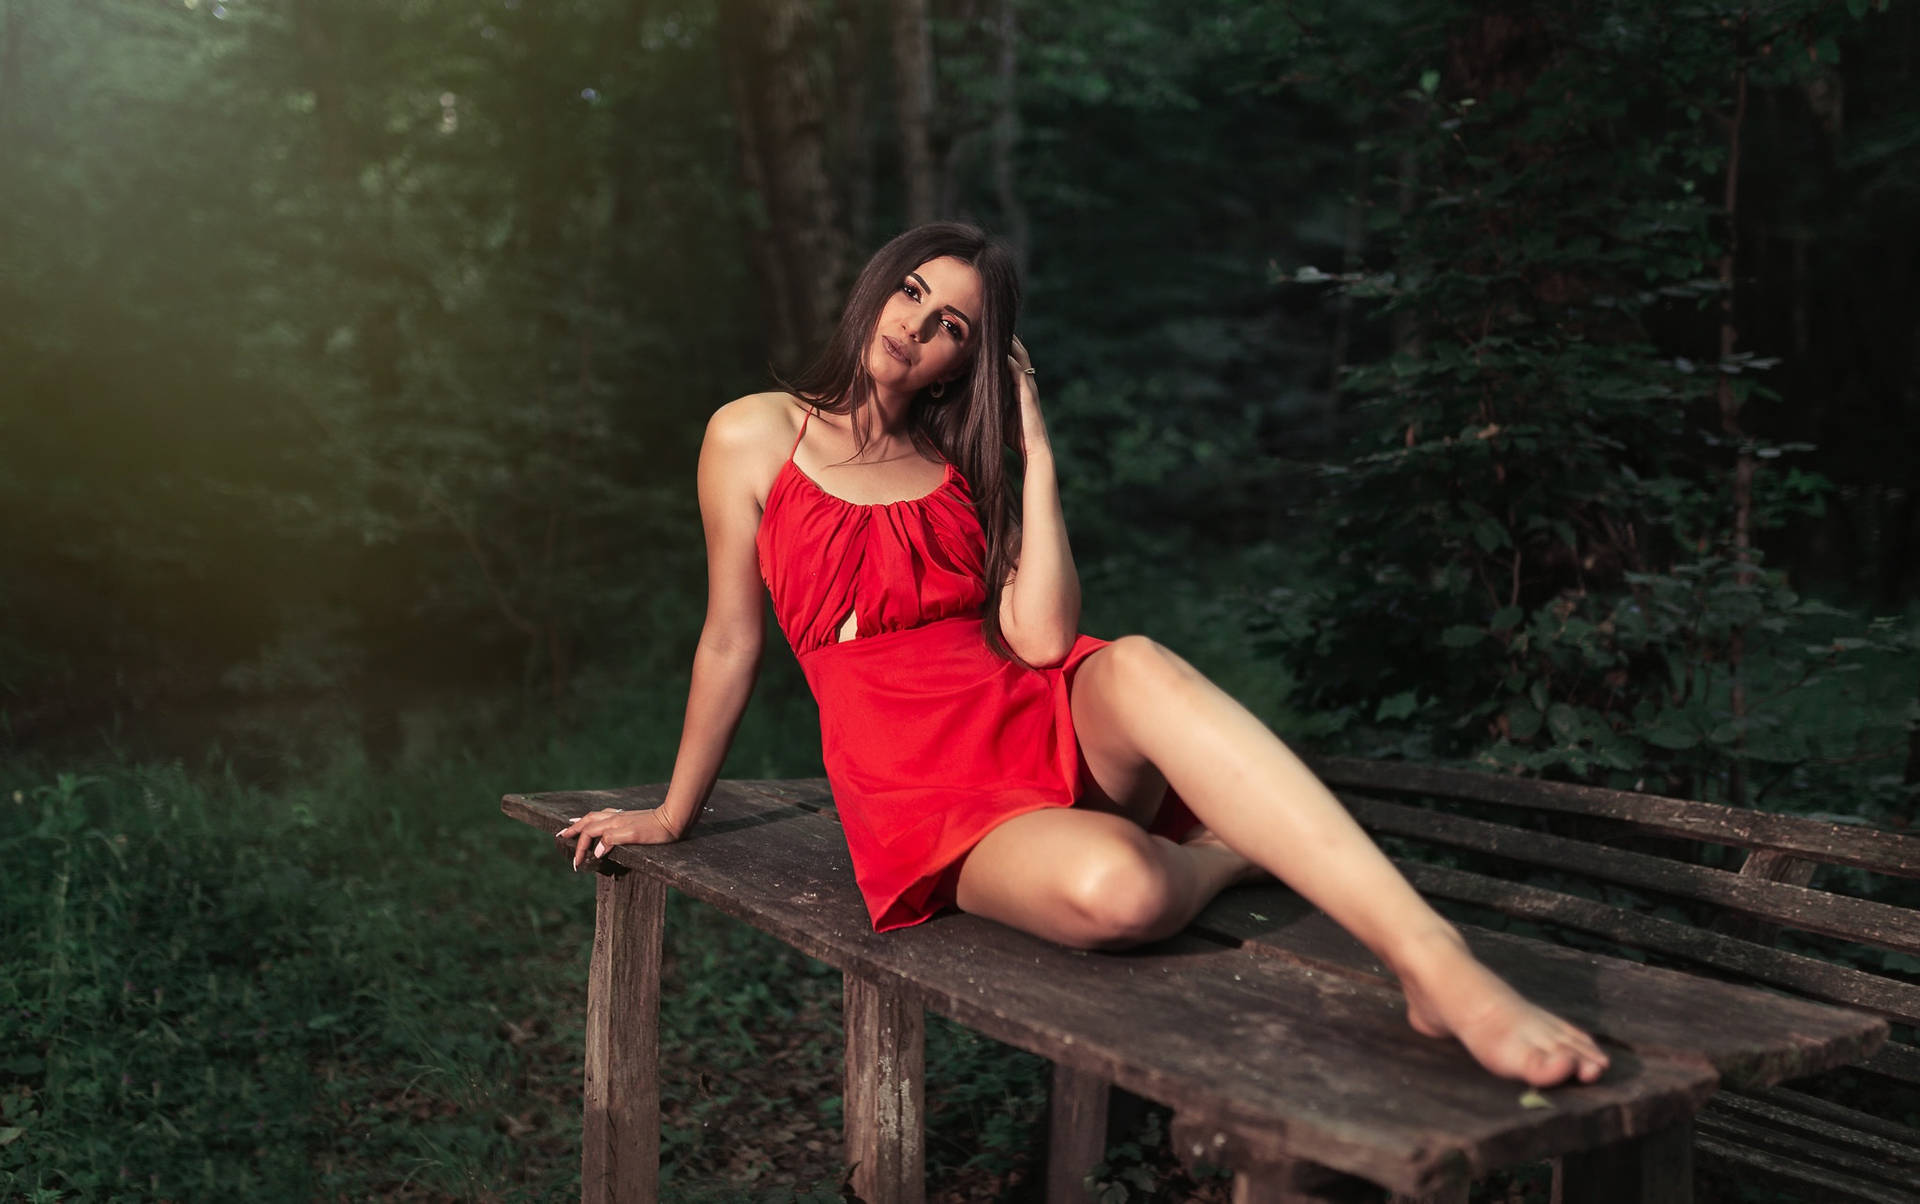 Woman In The Wood With Beautiful Legs Background